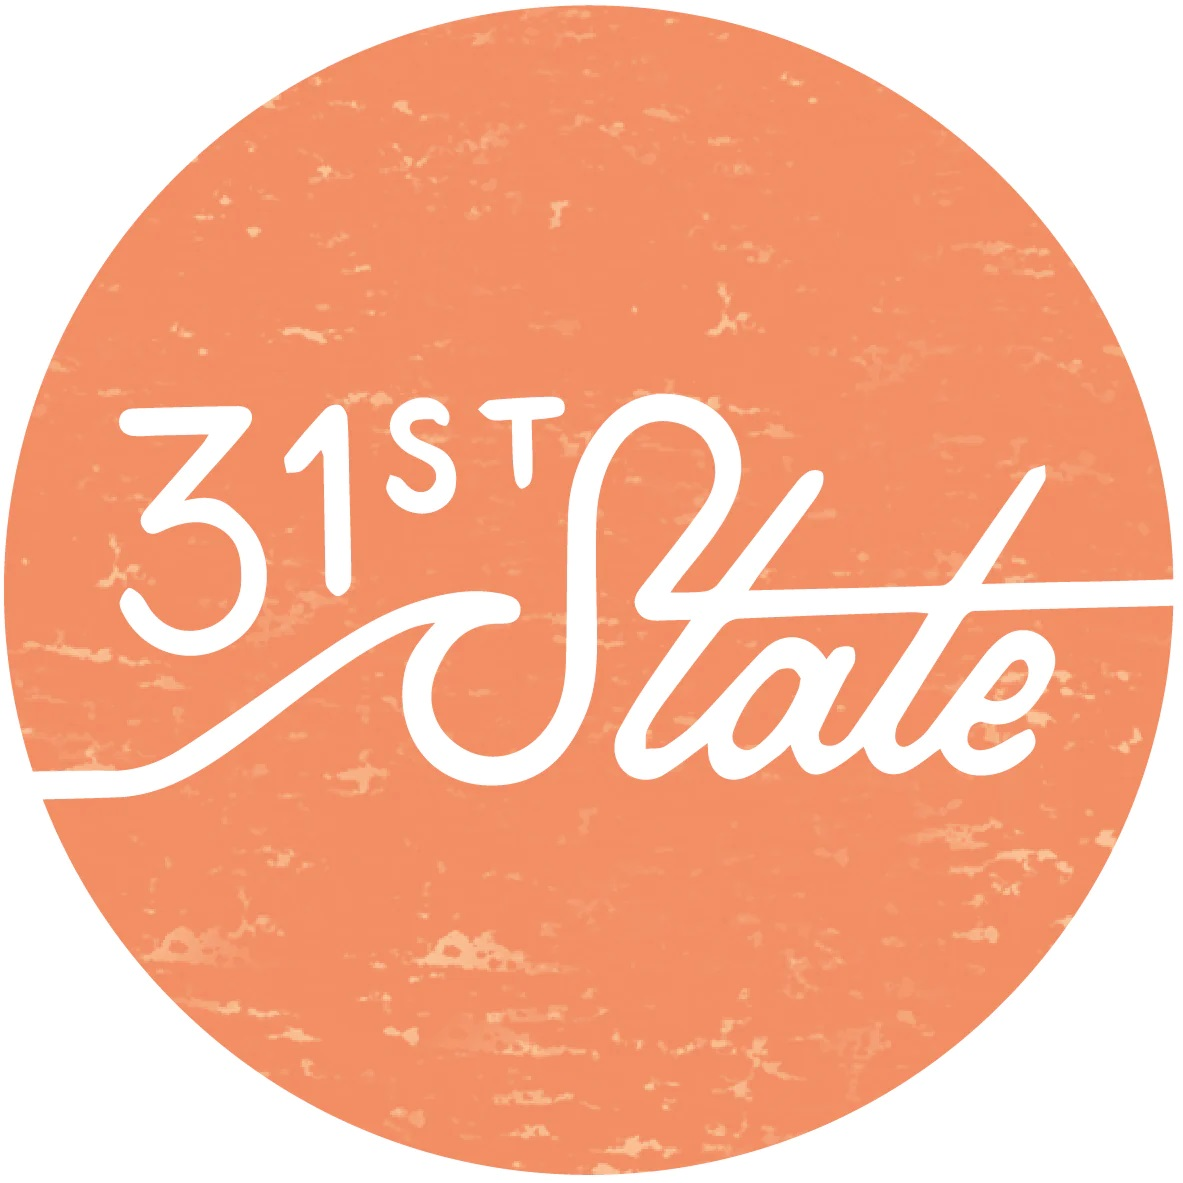 31st State